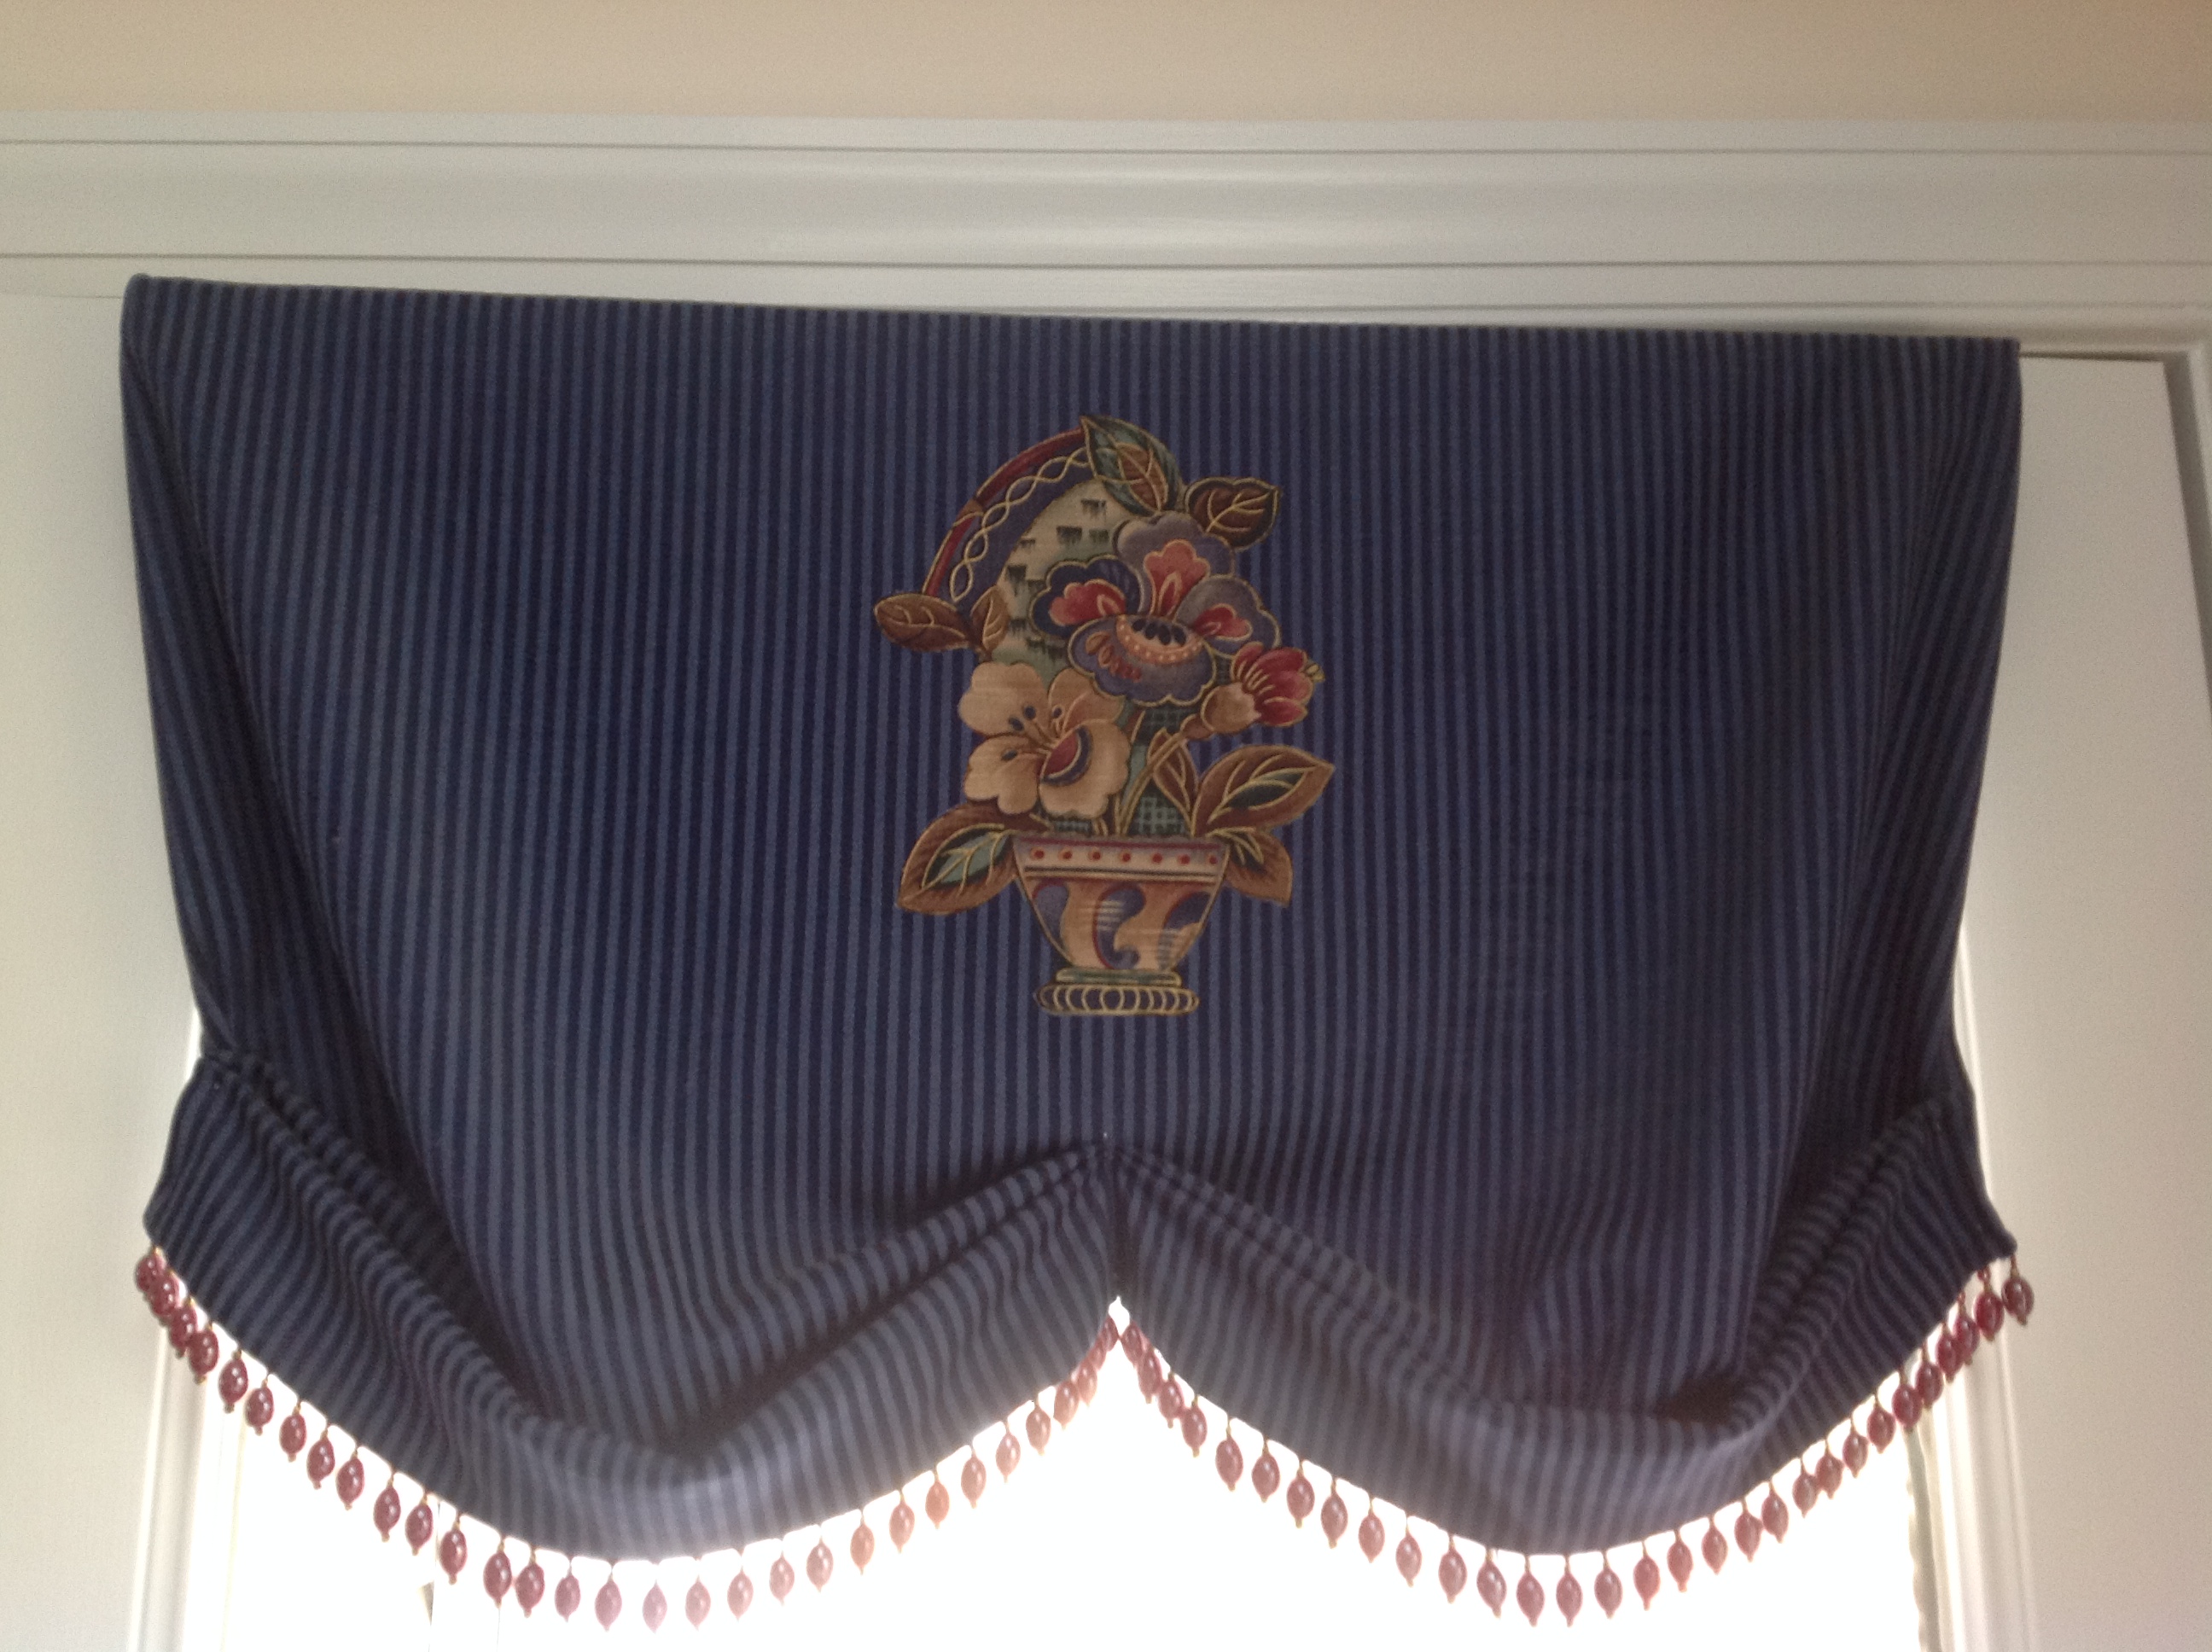 Coordinating valance (to scalloped valance with bells in Kitchen window) installed on french door in kitchen